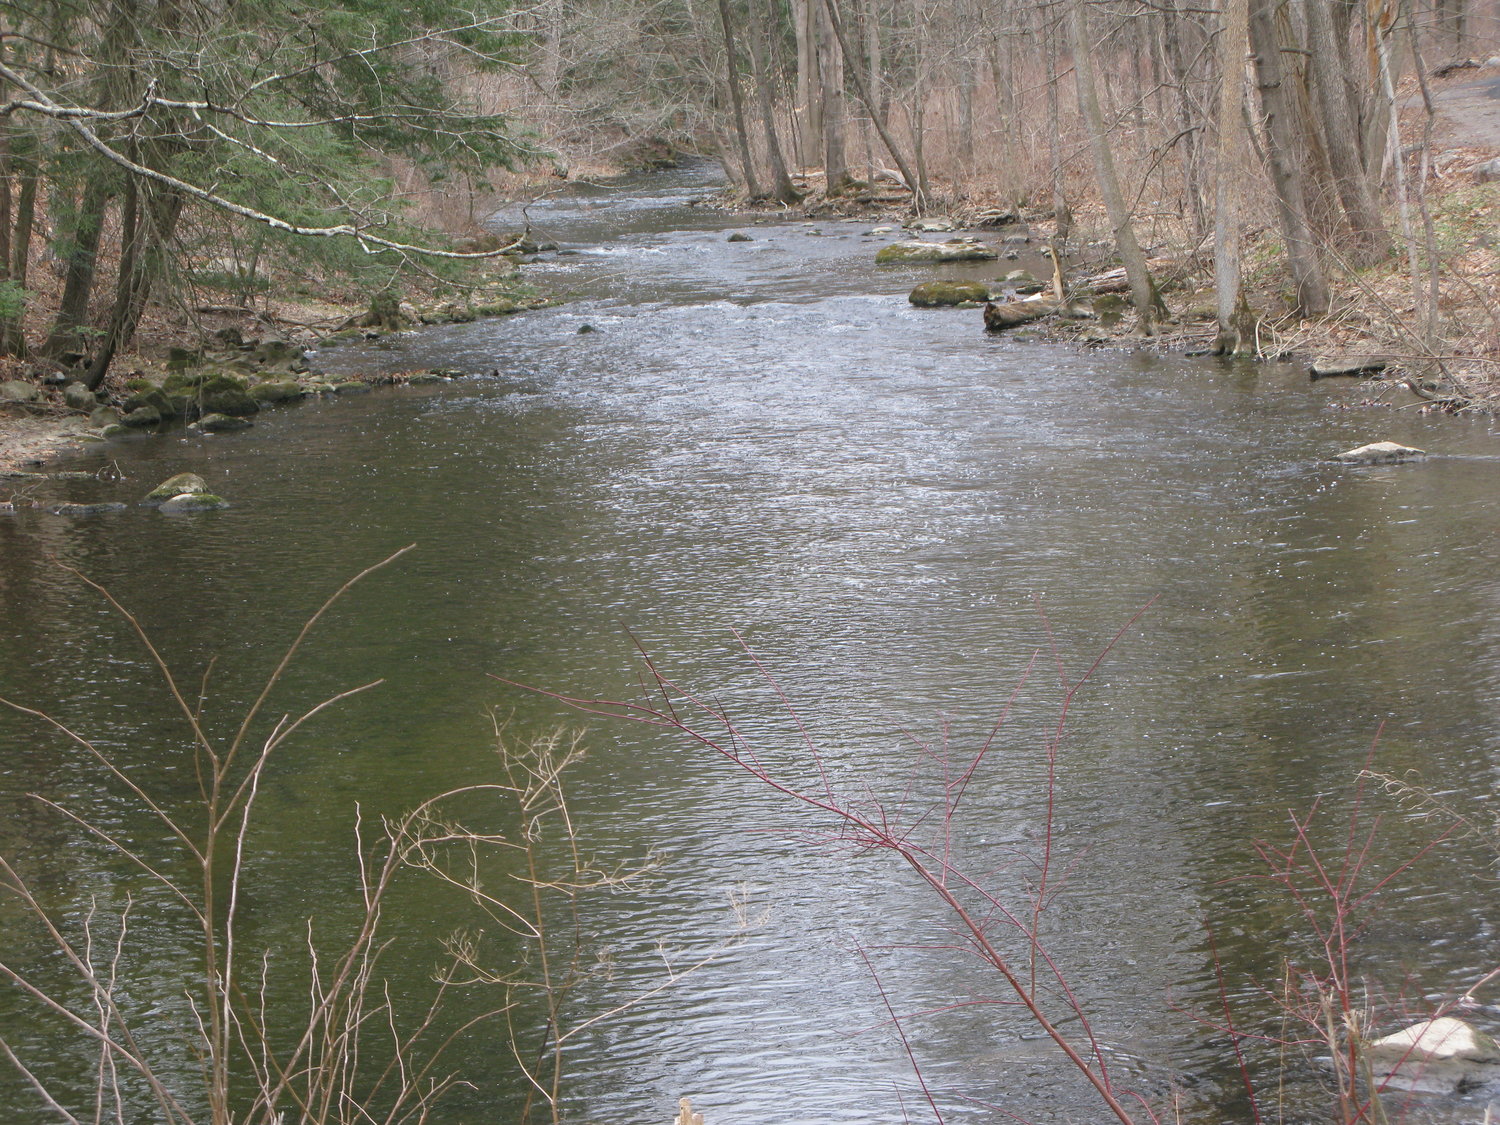 The Woodstreet pool, Amawalk outlet. This is the Westchester stream where DEC biologists studied trout population dynamics.